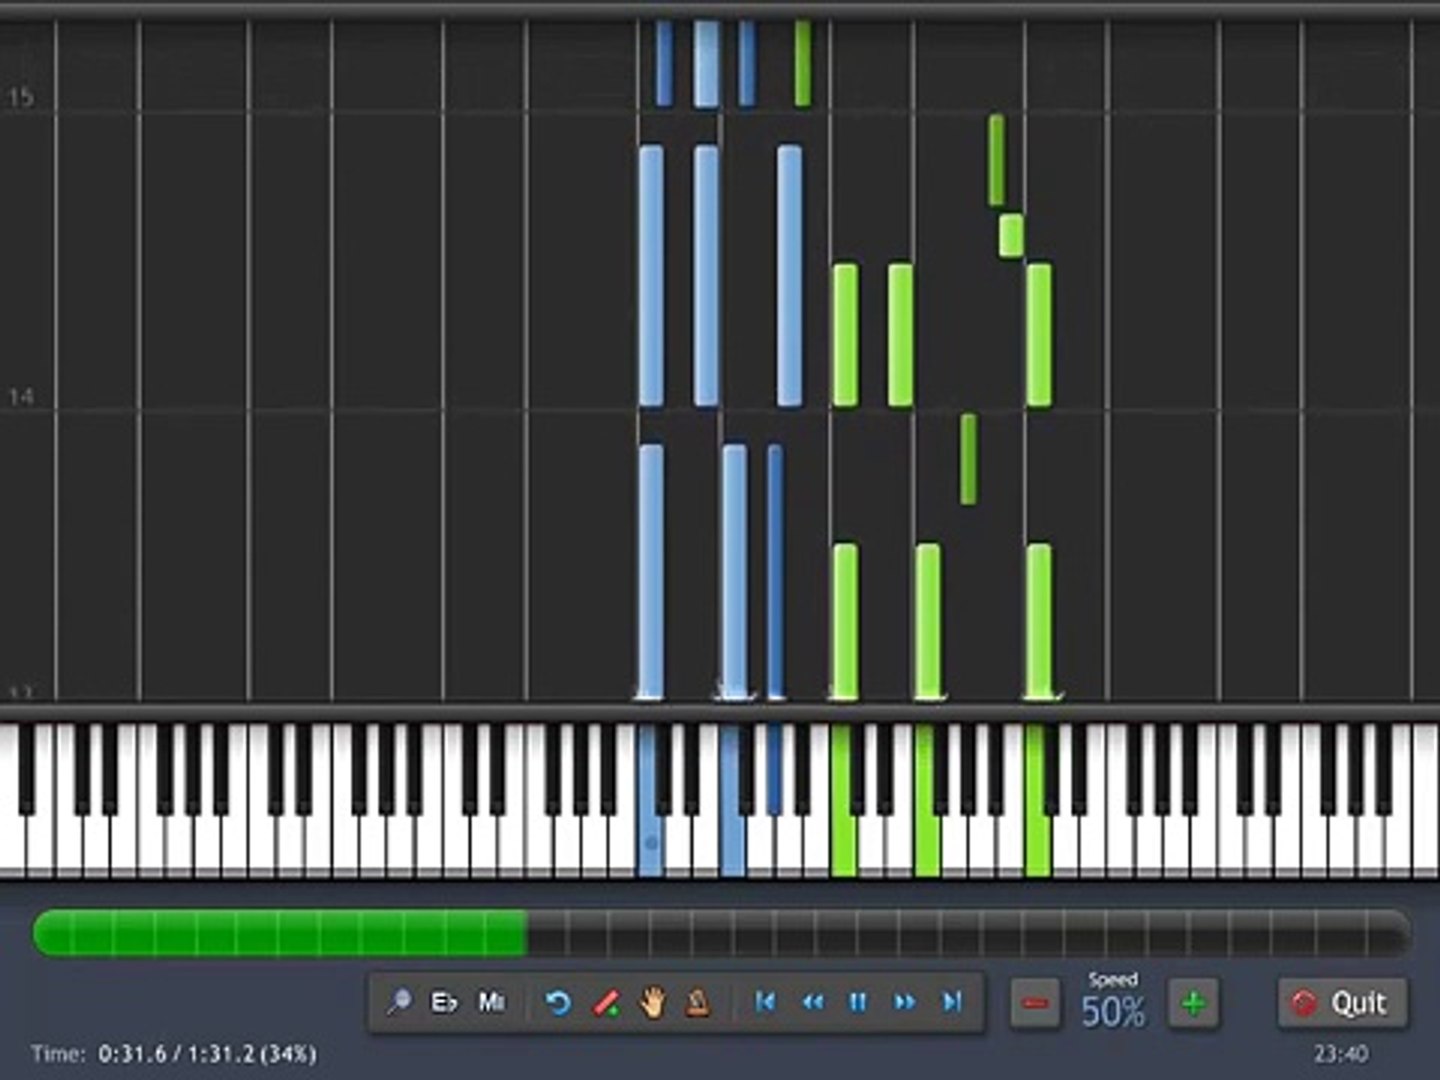 Harry Potter - Hedwigs Theme - Piano Tutorial (50% Speed) Synthesia + Sheet  Music - Vidéo Dailymotion